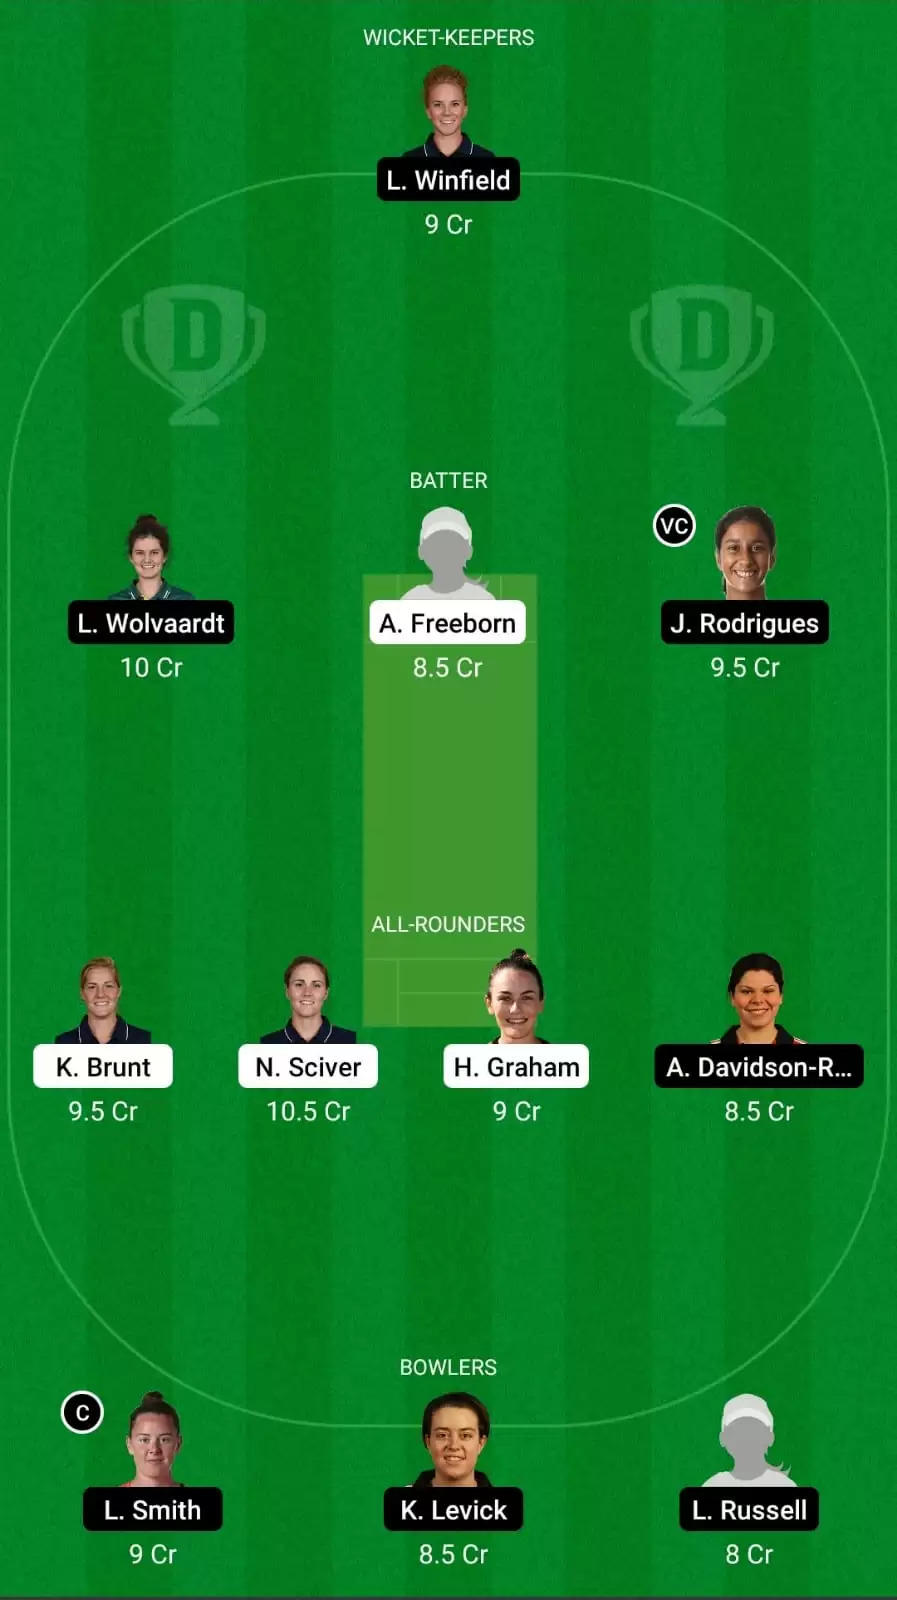 TRT-W vs NOS-W Dream11 Team Prediction for The Hundred Women’s 2021: Trent Rockets Women vs Northern Superchargers Women Best Fantasy Cricket Tips, Strongest Playing XI, Pitch Report and Player Updates